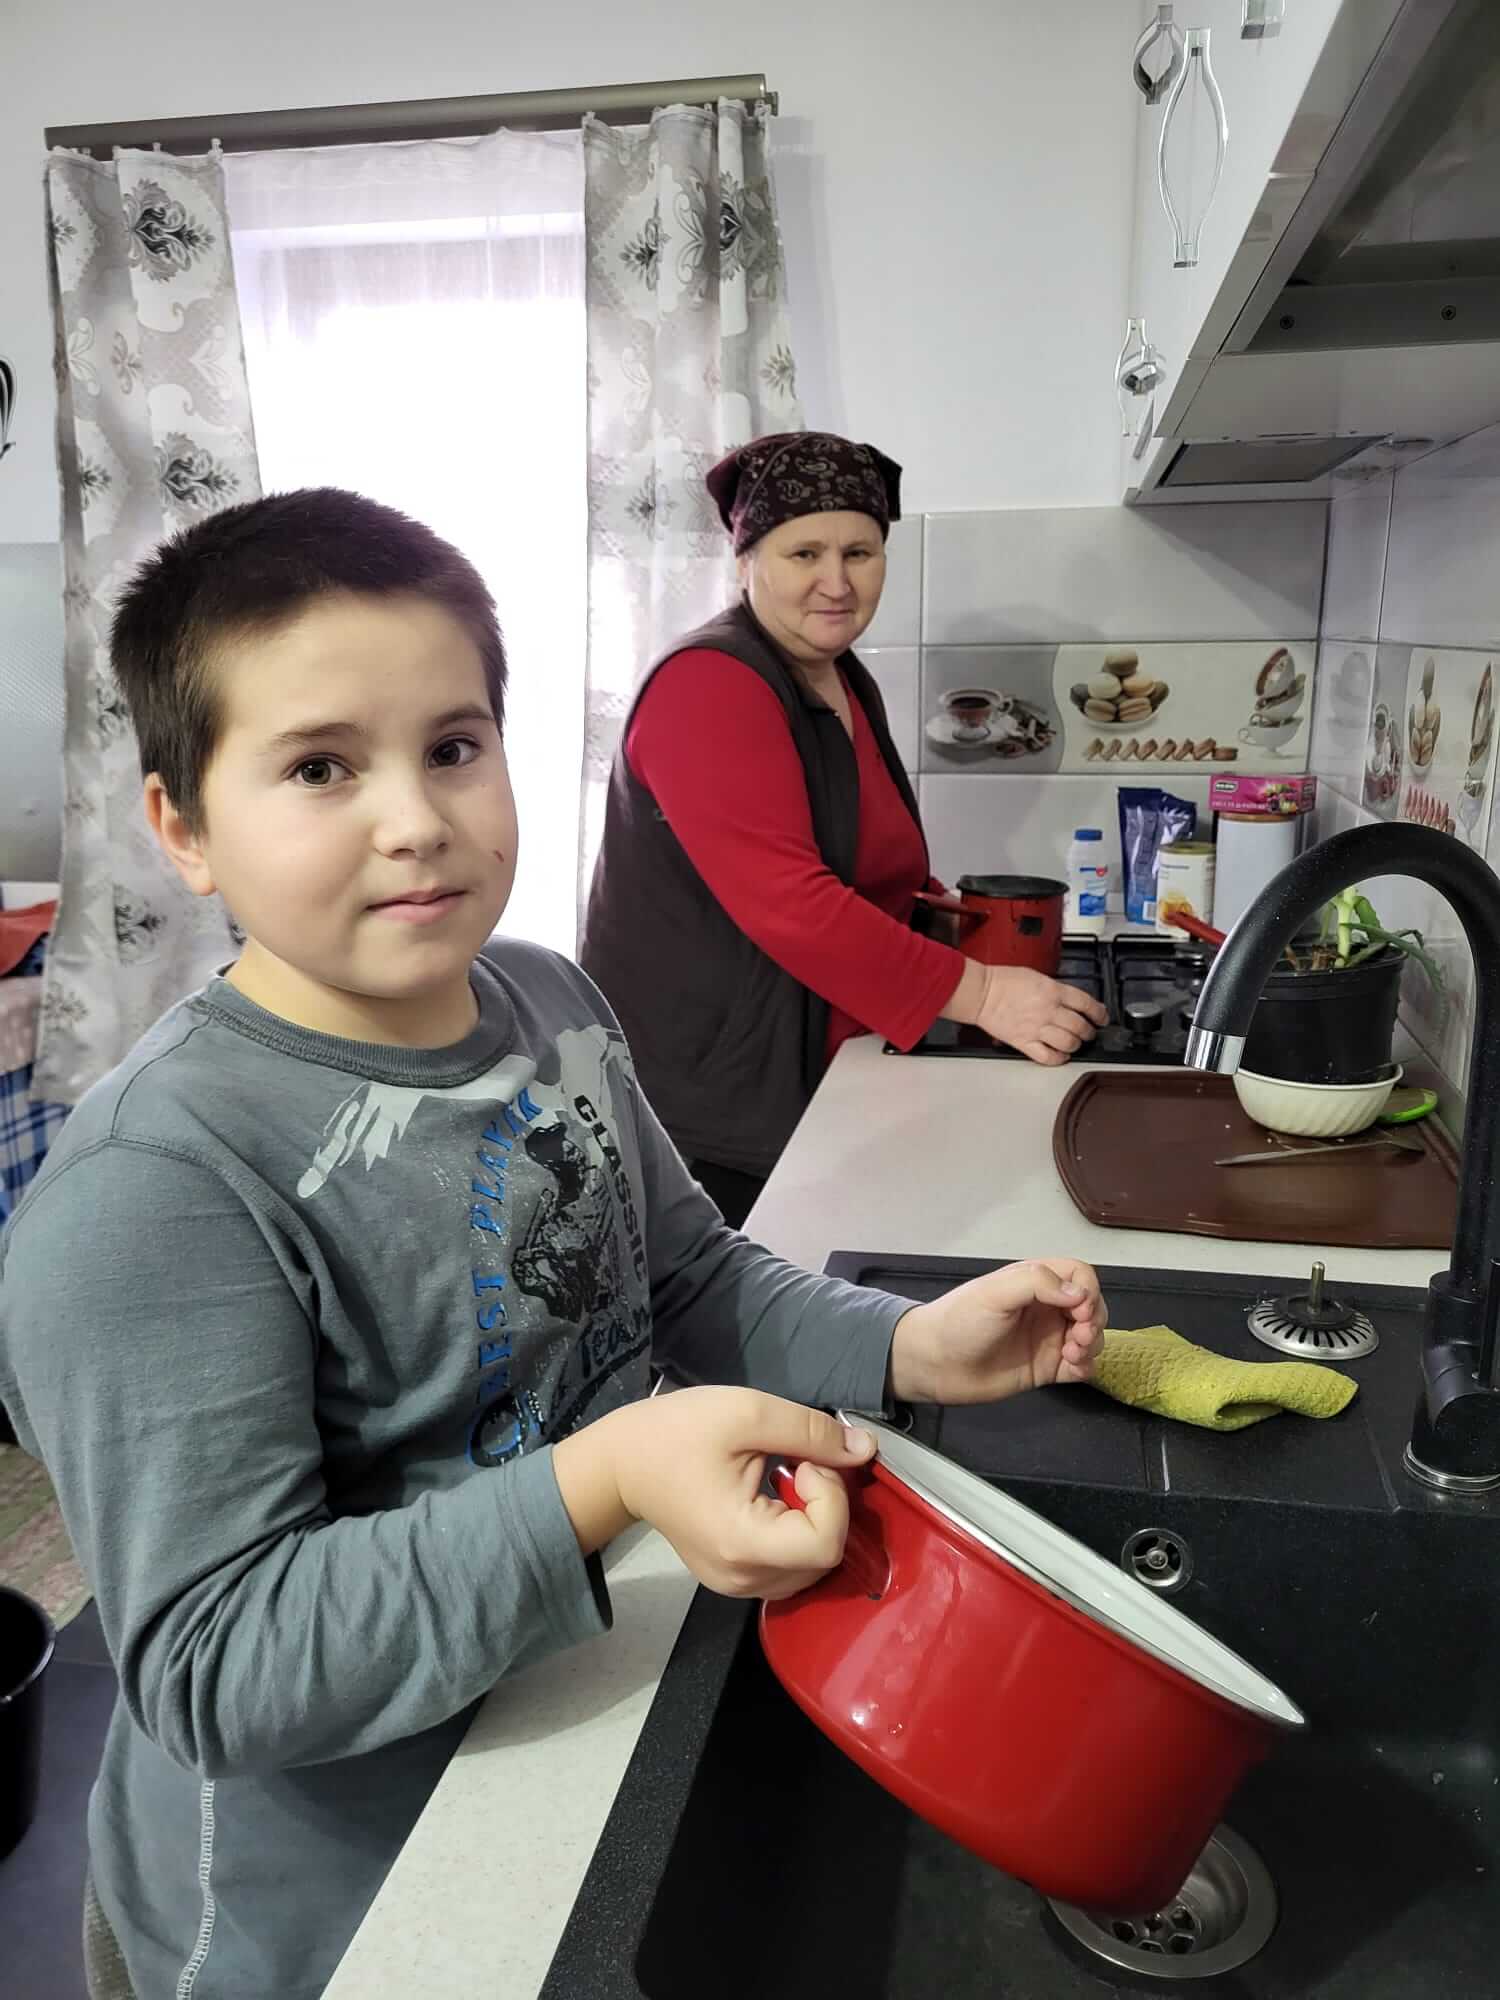 Ionut helps his grandmother with the dishes